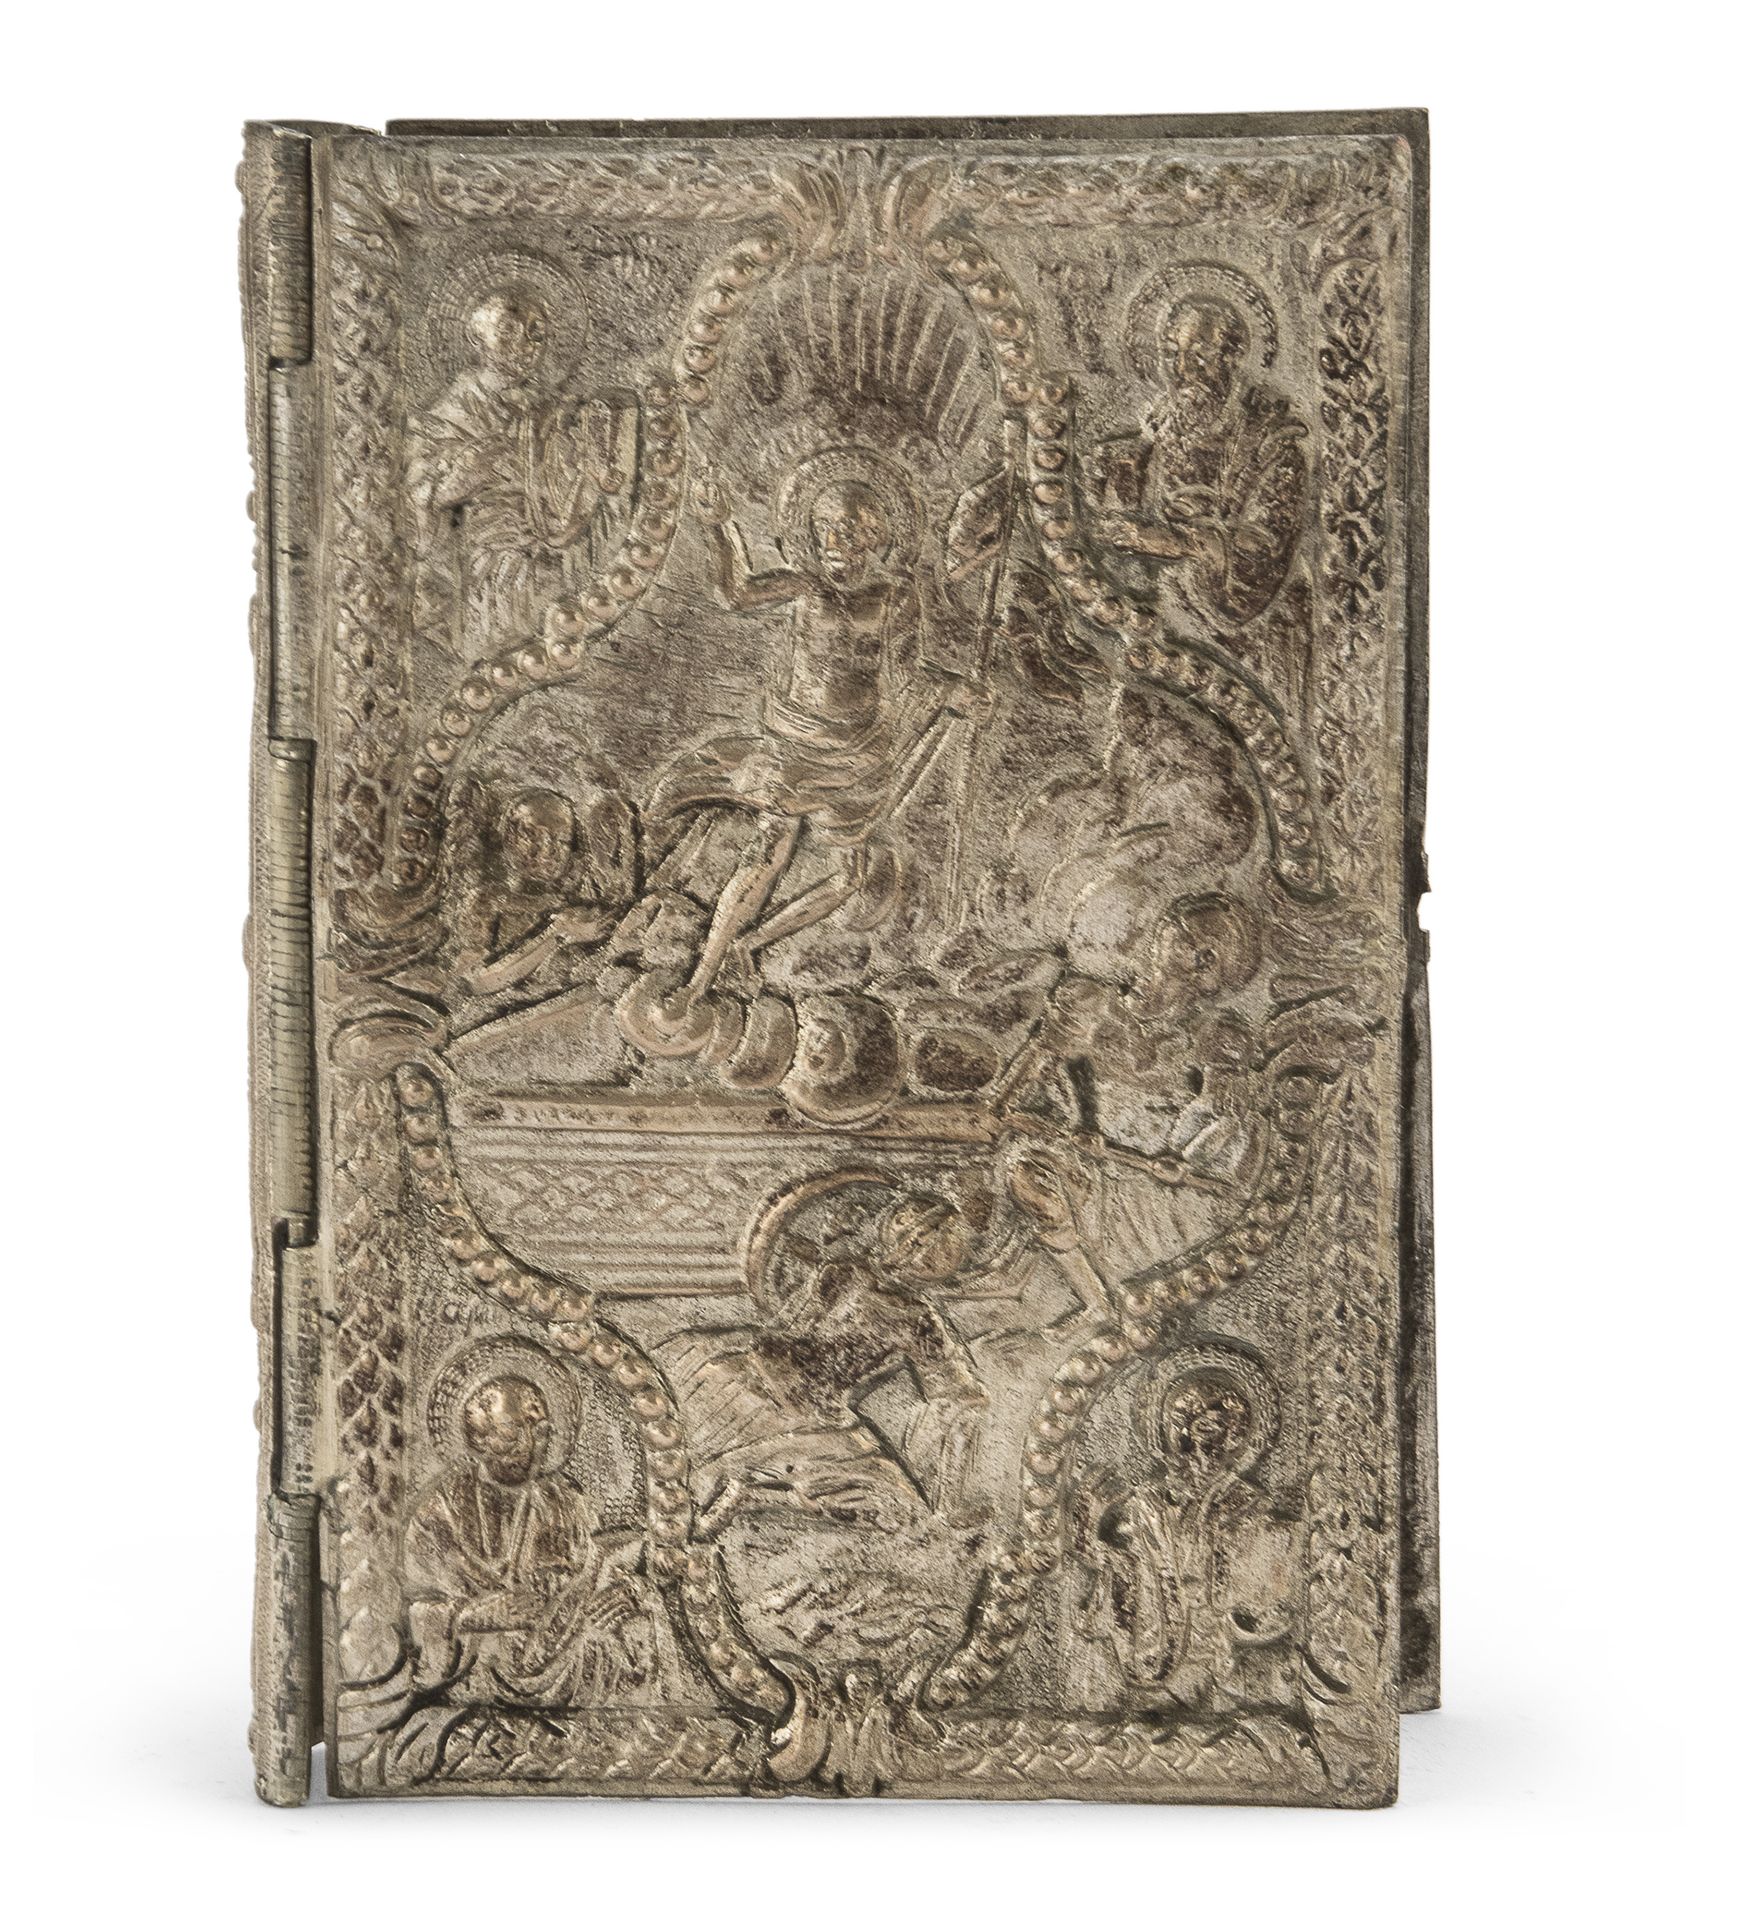 Null SILVER BRONZE BINDING, GREECE OR BALKANS, LATE 19TH CENTURY